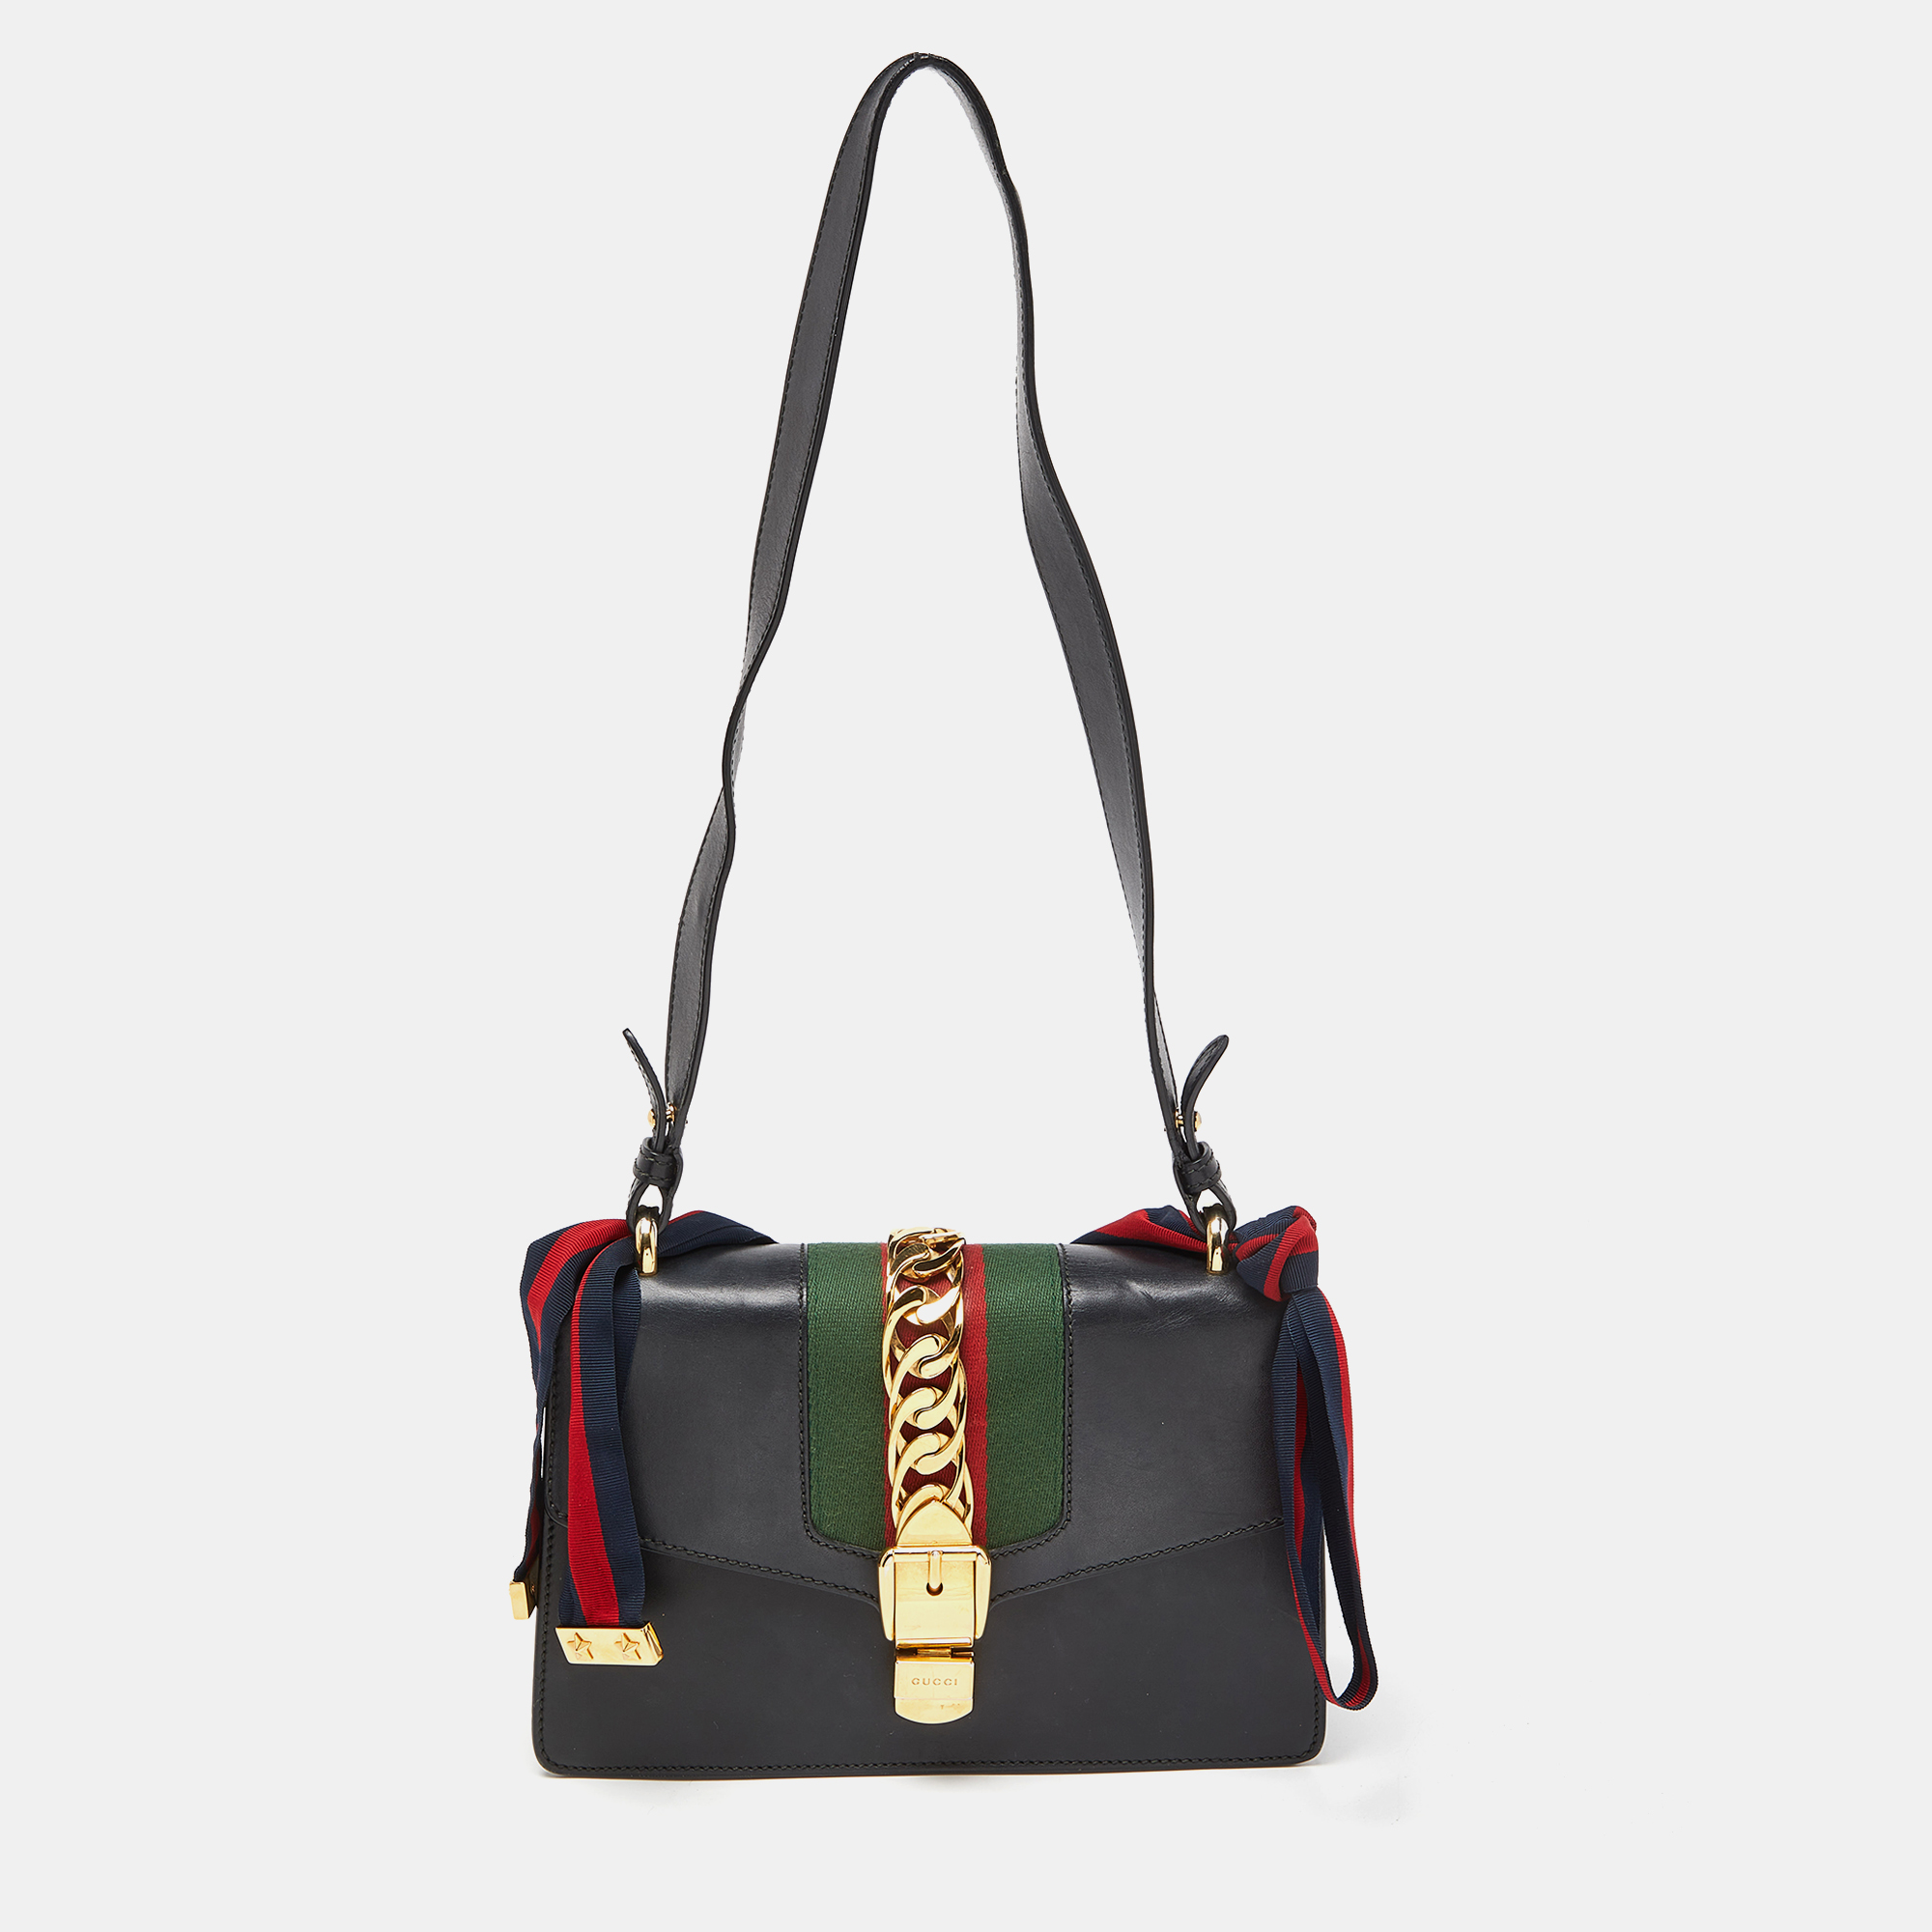 Indulge in luxury with this Gucci bag. Meticulously crafted from premium materials it combines exquisite design impeccable craftsmanship and timeless elegance. Elevate your style with this fashion accessory.